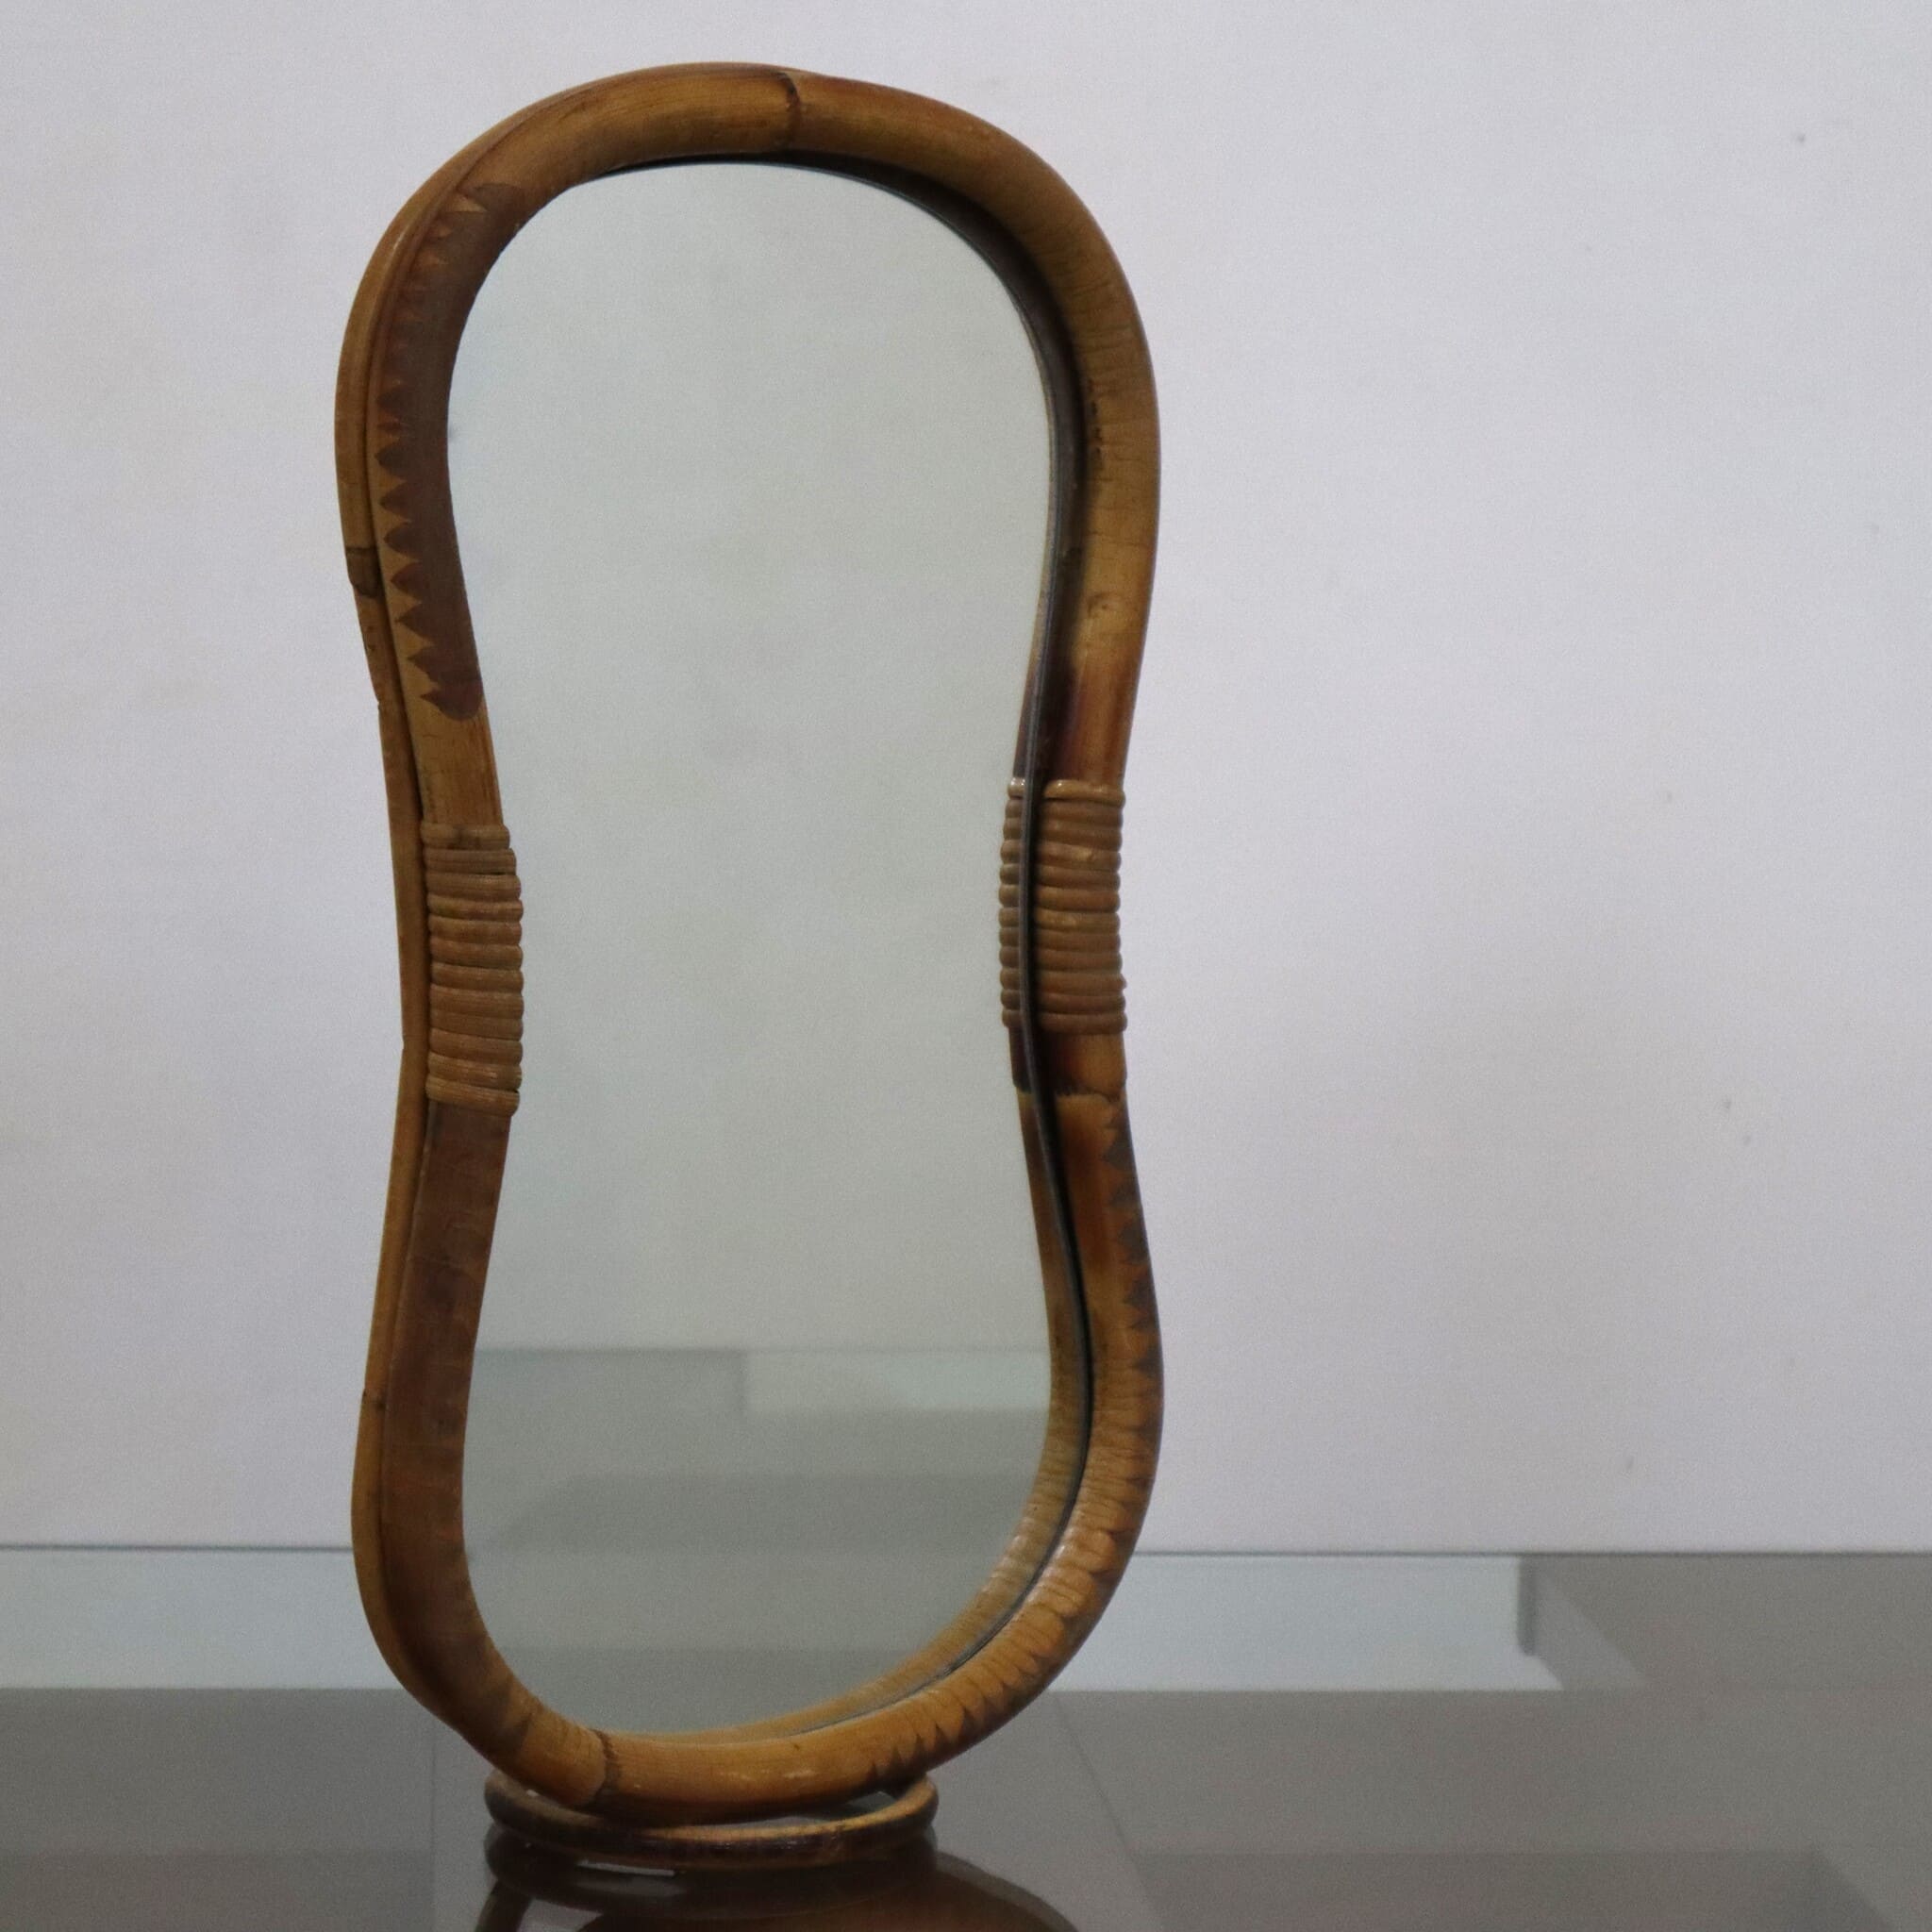 mirror-support-bamboo-vinta-ge-years-60s-front-detail-visionsdepoca